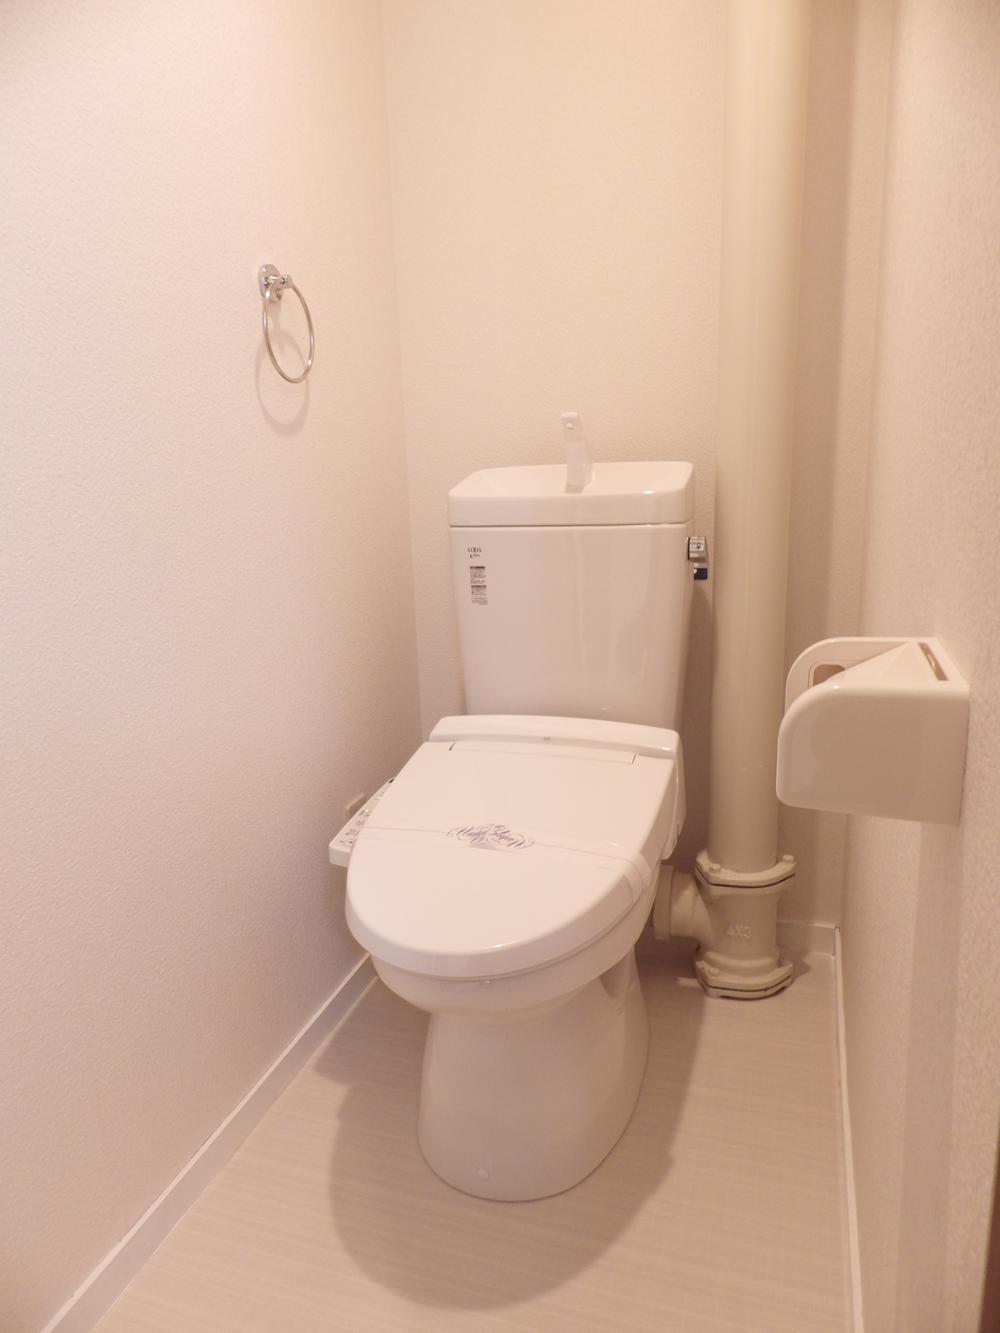 Toilet. Toilet with a cleaning toilet seat